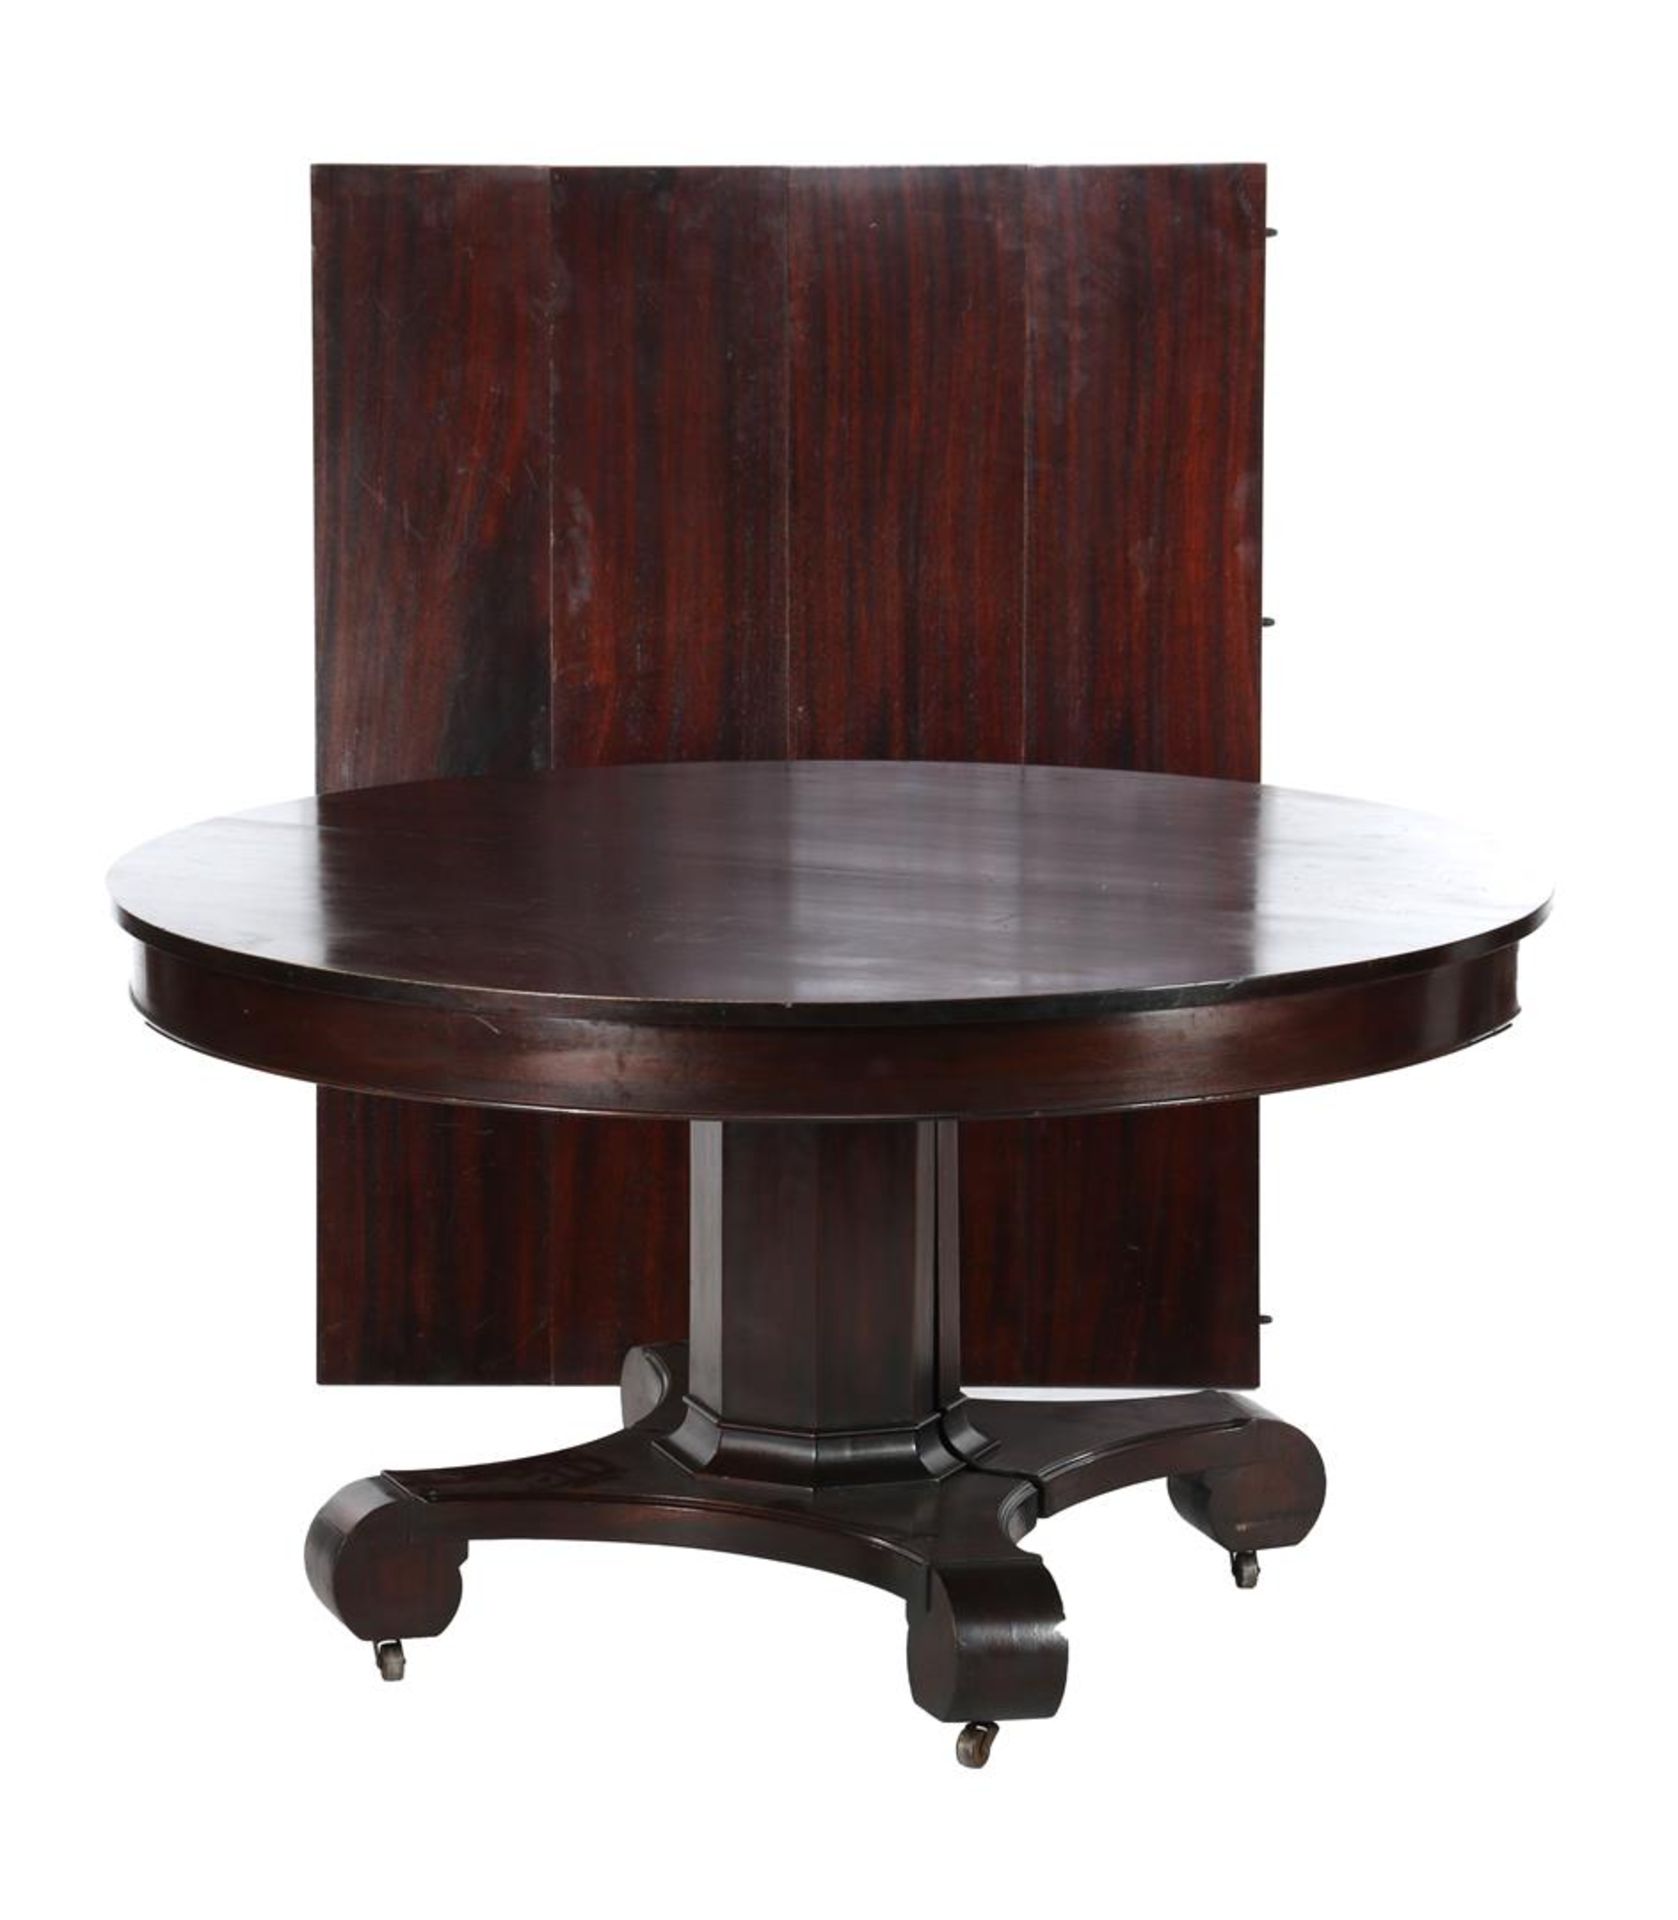 Dining room table